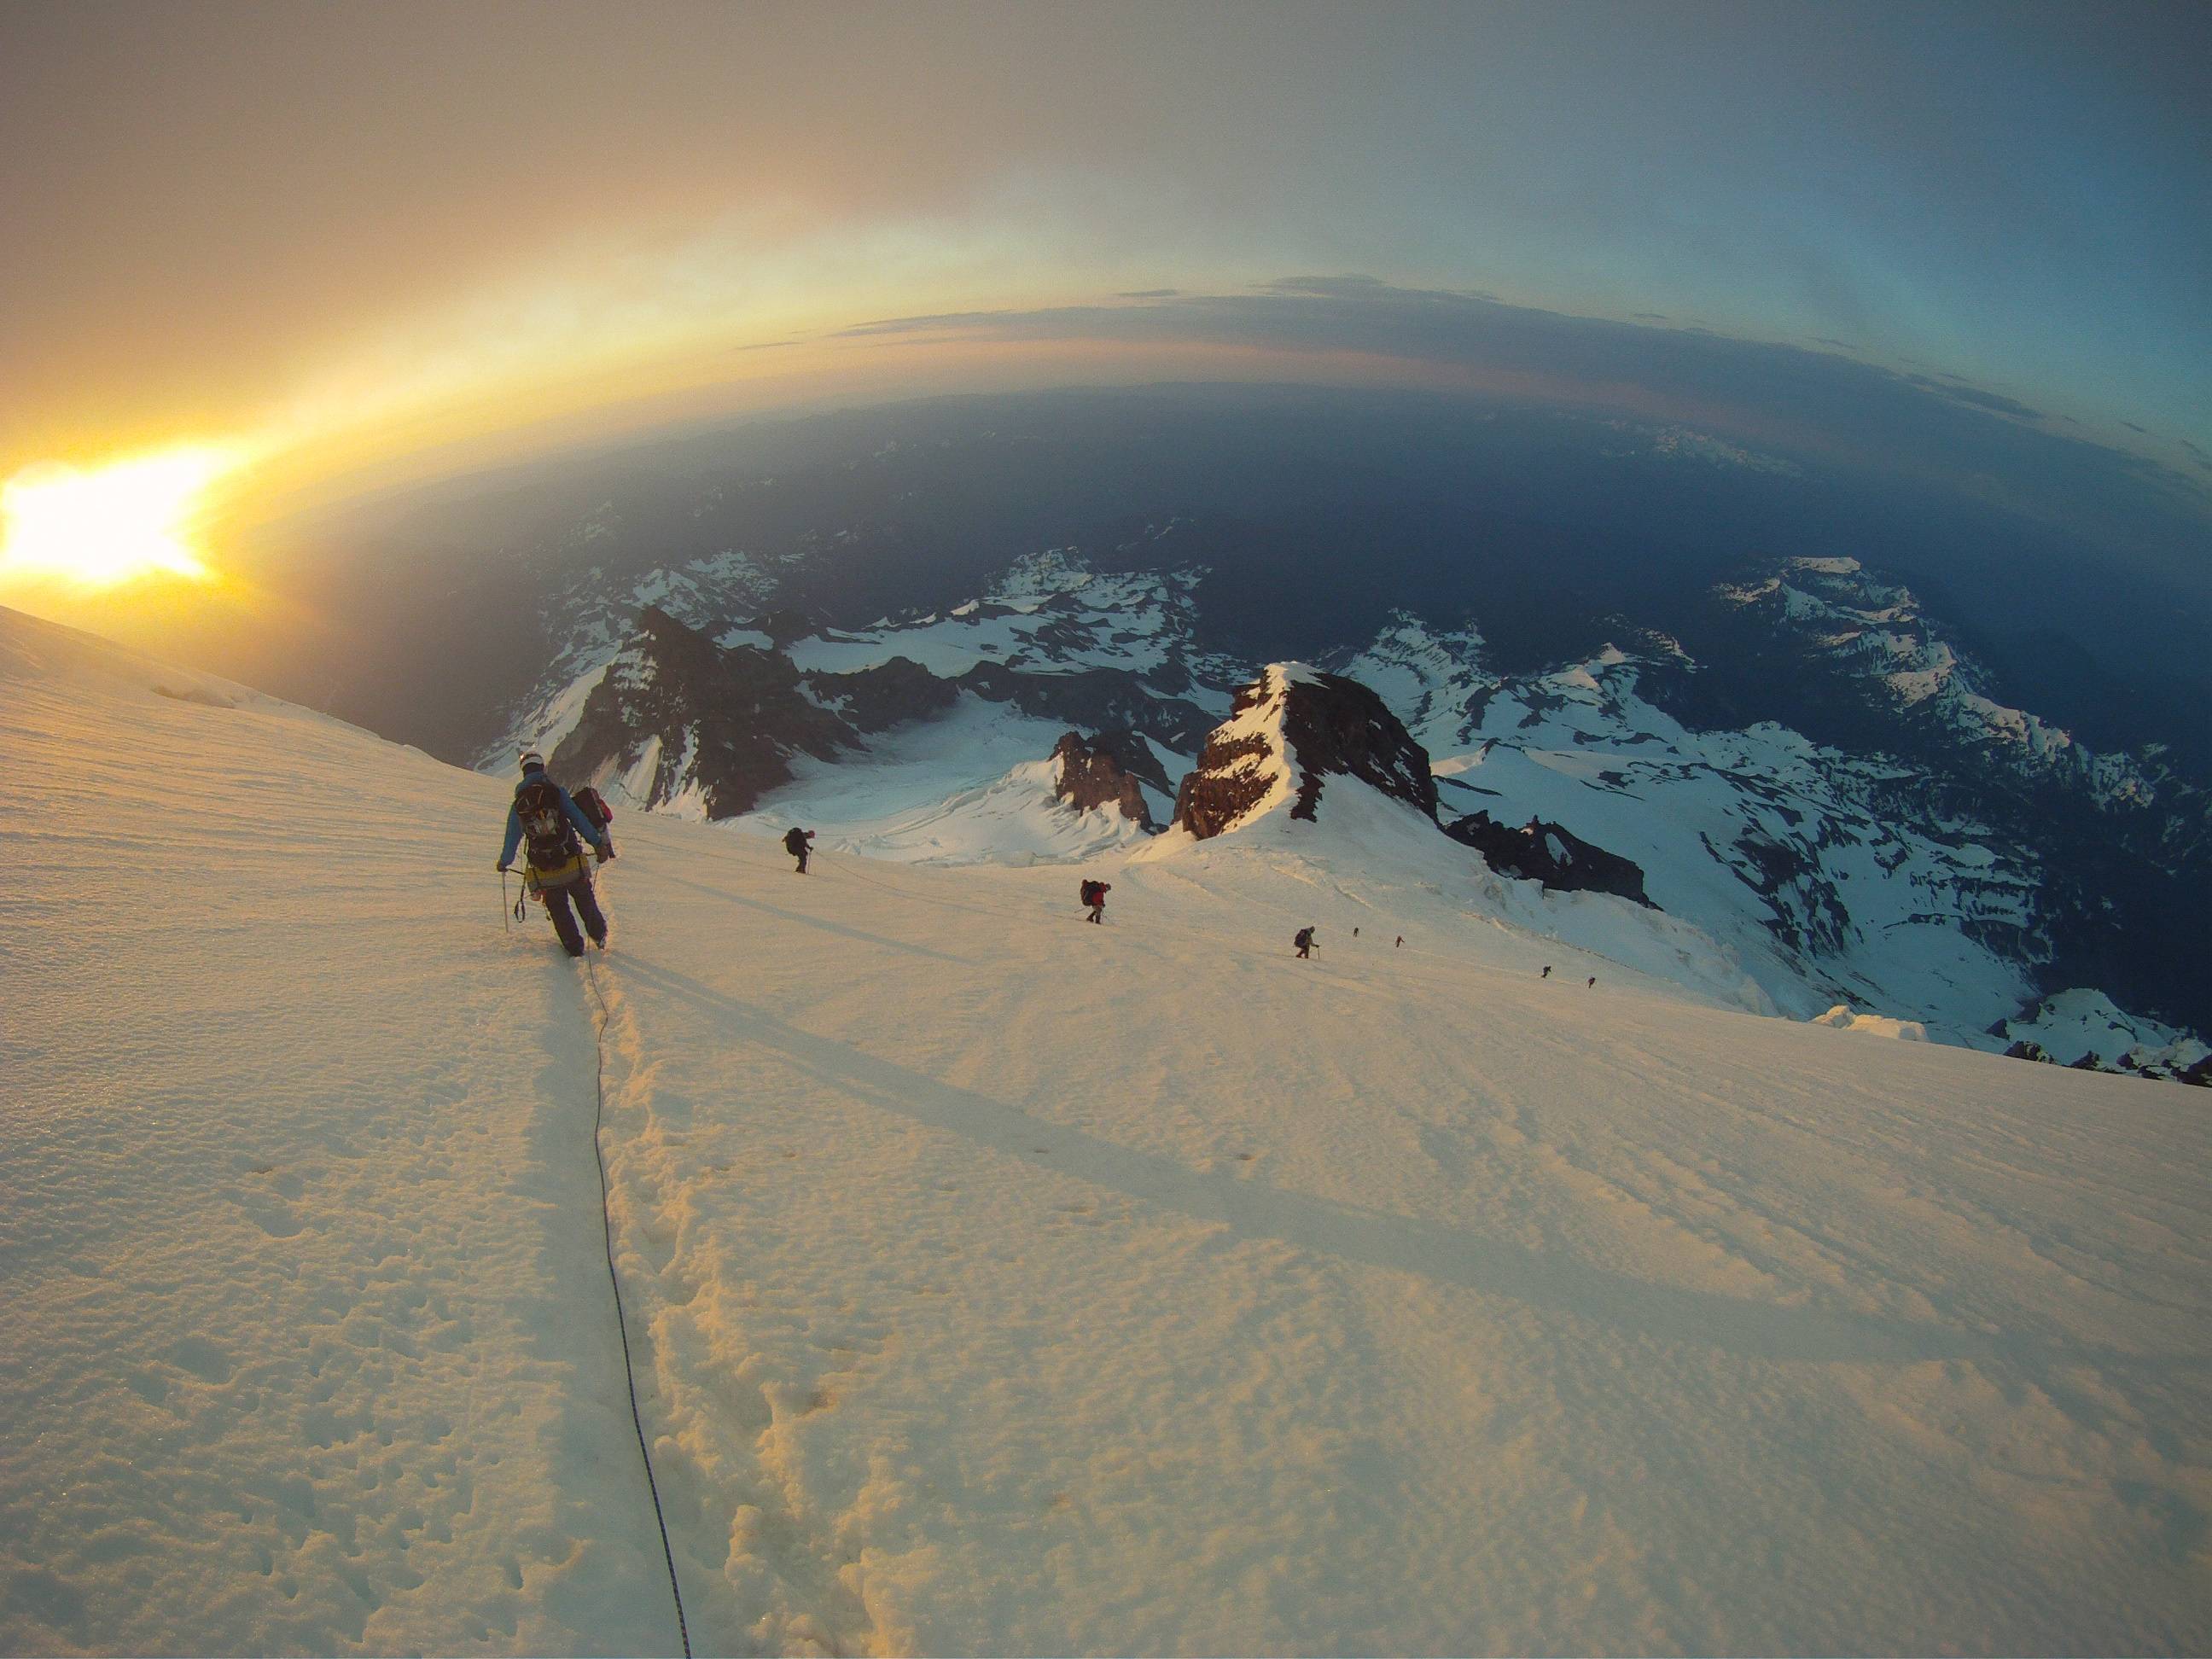 Mount Rainier, Washington. The view from the height of 8000 